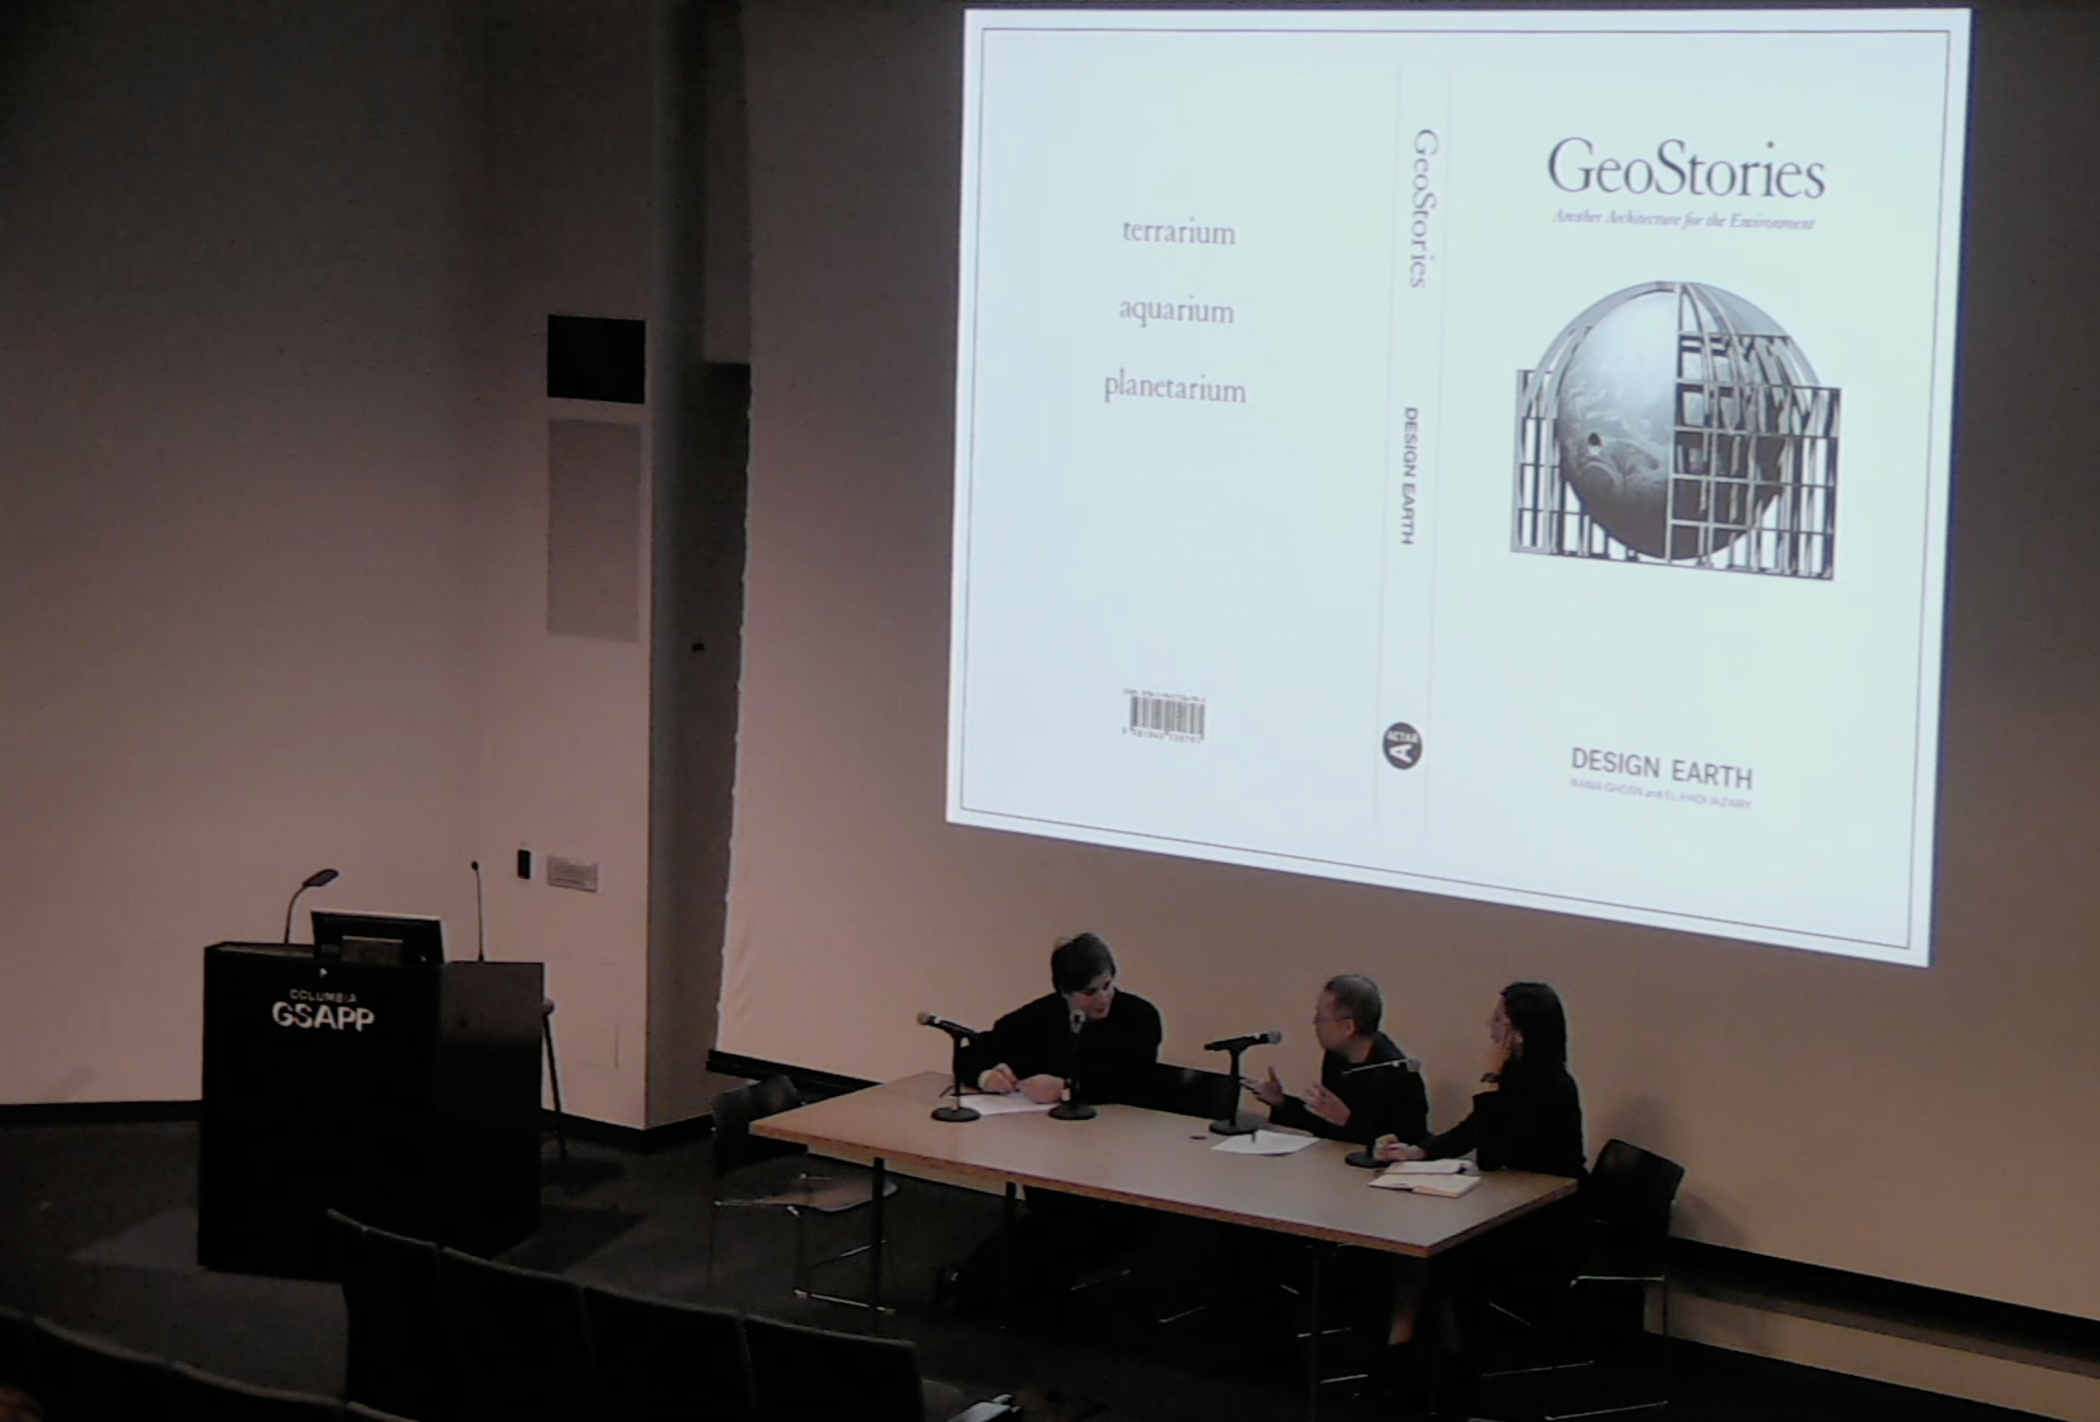 Three people sit at a table with microphones in front of a large screen that shows the cover of a book titled "GeoStories"